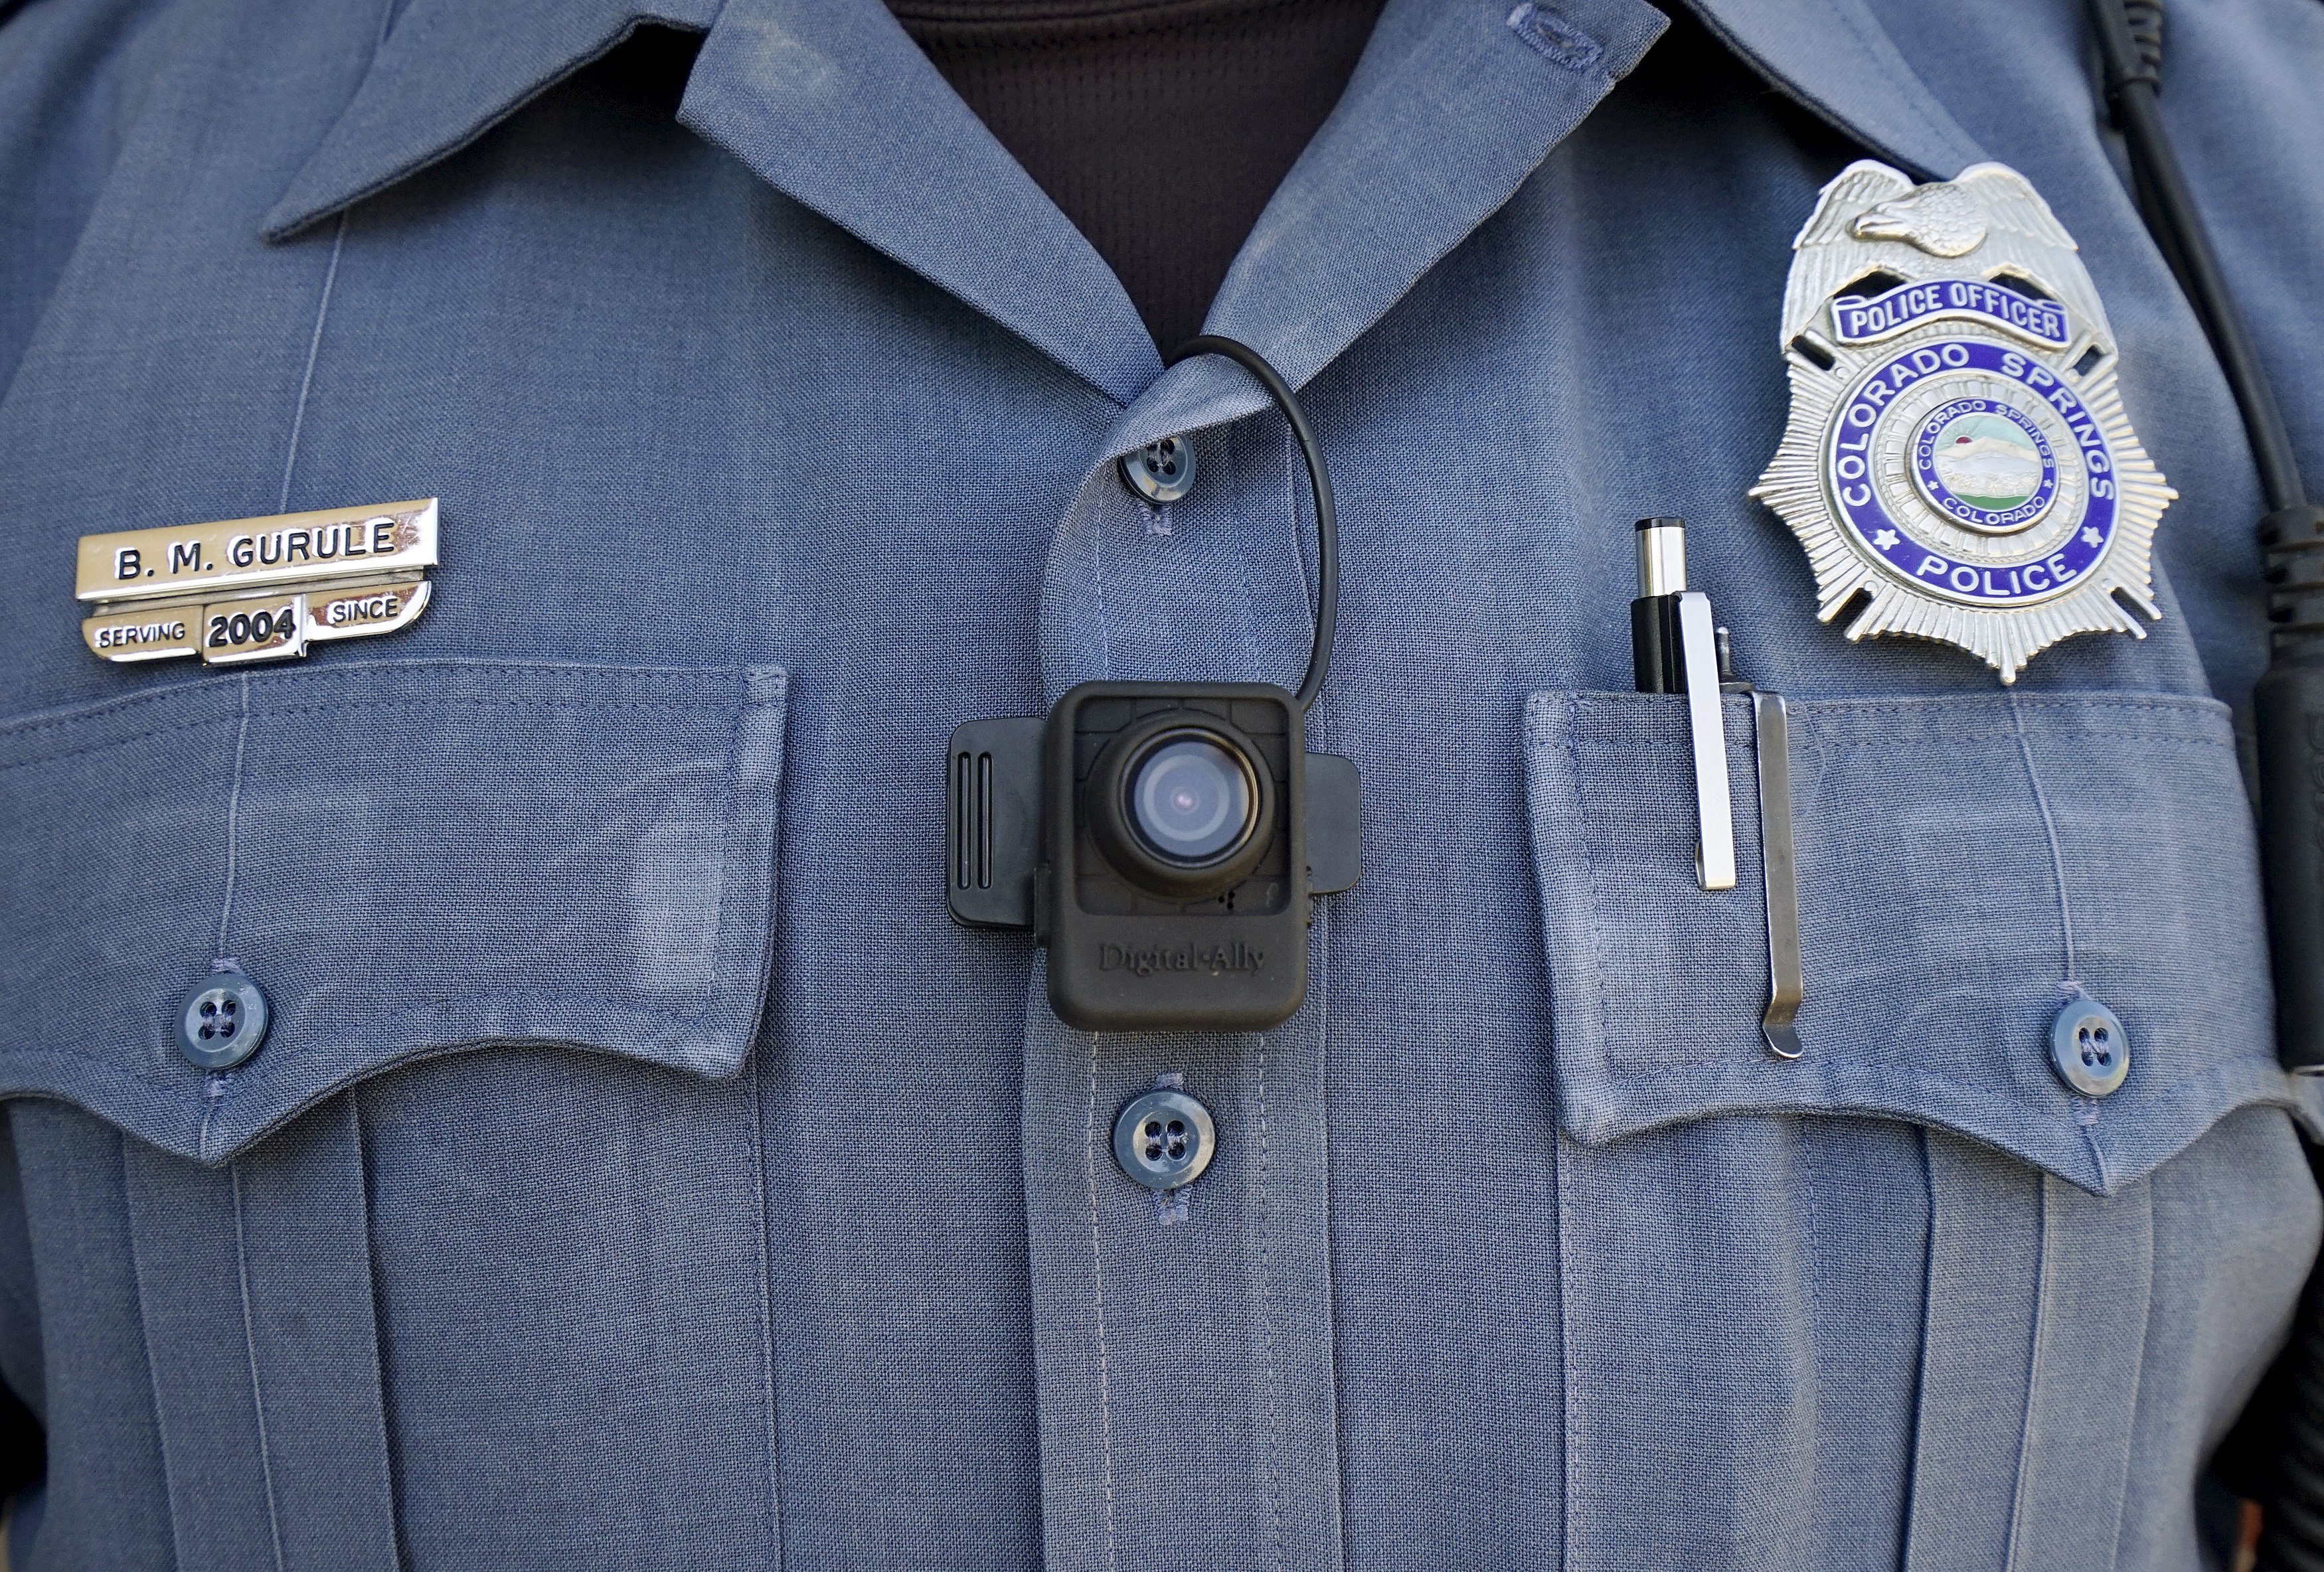 Brian Gurule, a Colorado Springs motor officer poses with a Digital Ally First Vu HD body worn camera worn on his chest in Colorado Springs on April 21, 2015. (Rick Wilking—Reuters)